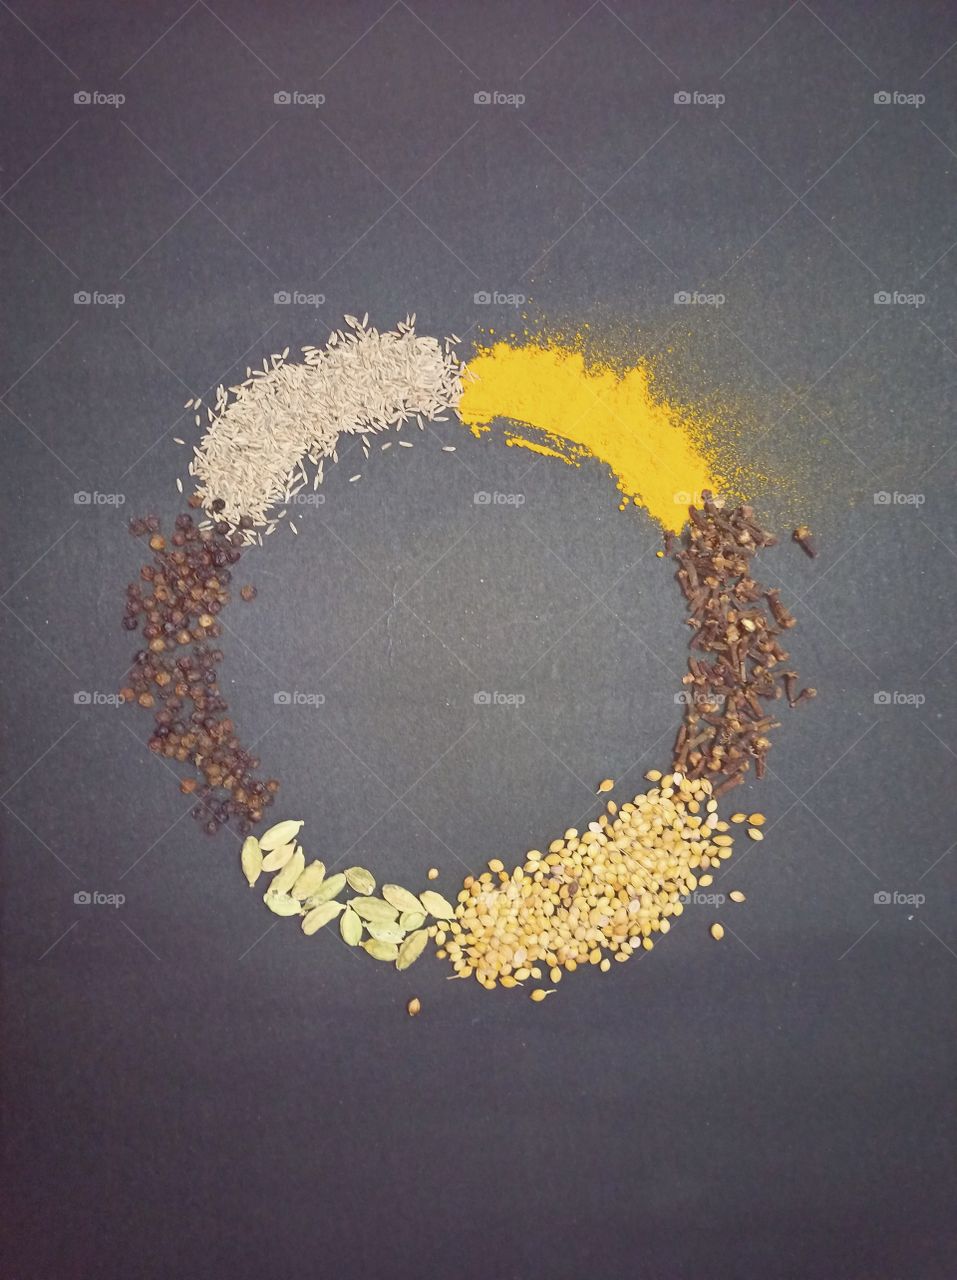 spices arranged in a ⭕ circular form on a black 🖤🖤 background, which is usable in every day life... flat lays photography